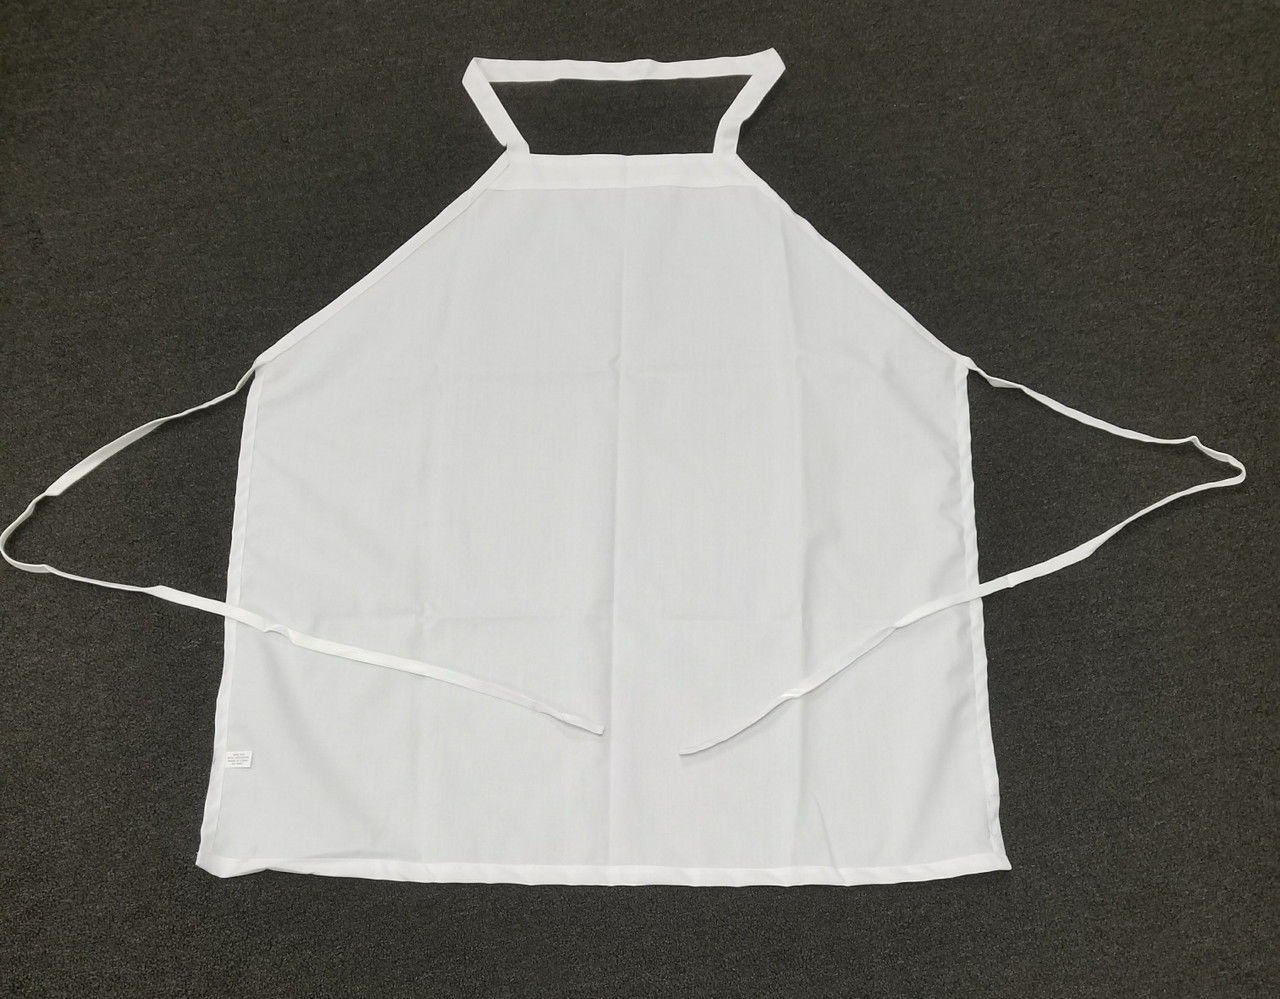 Do these white chef aprons come with pockets?